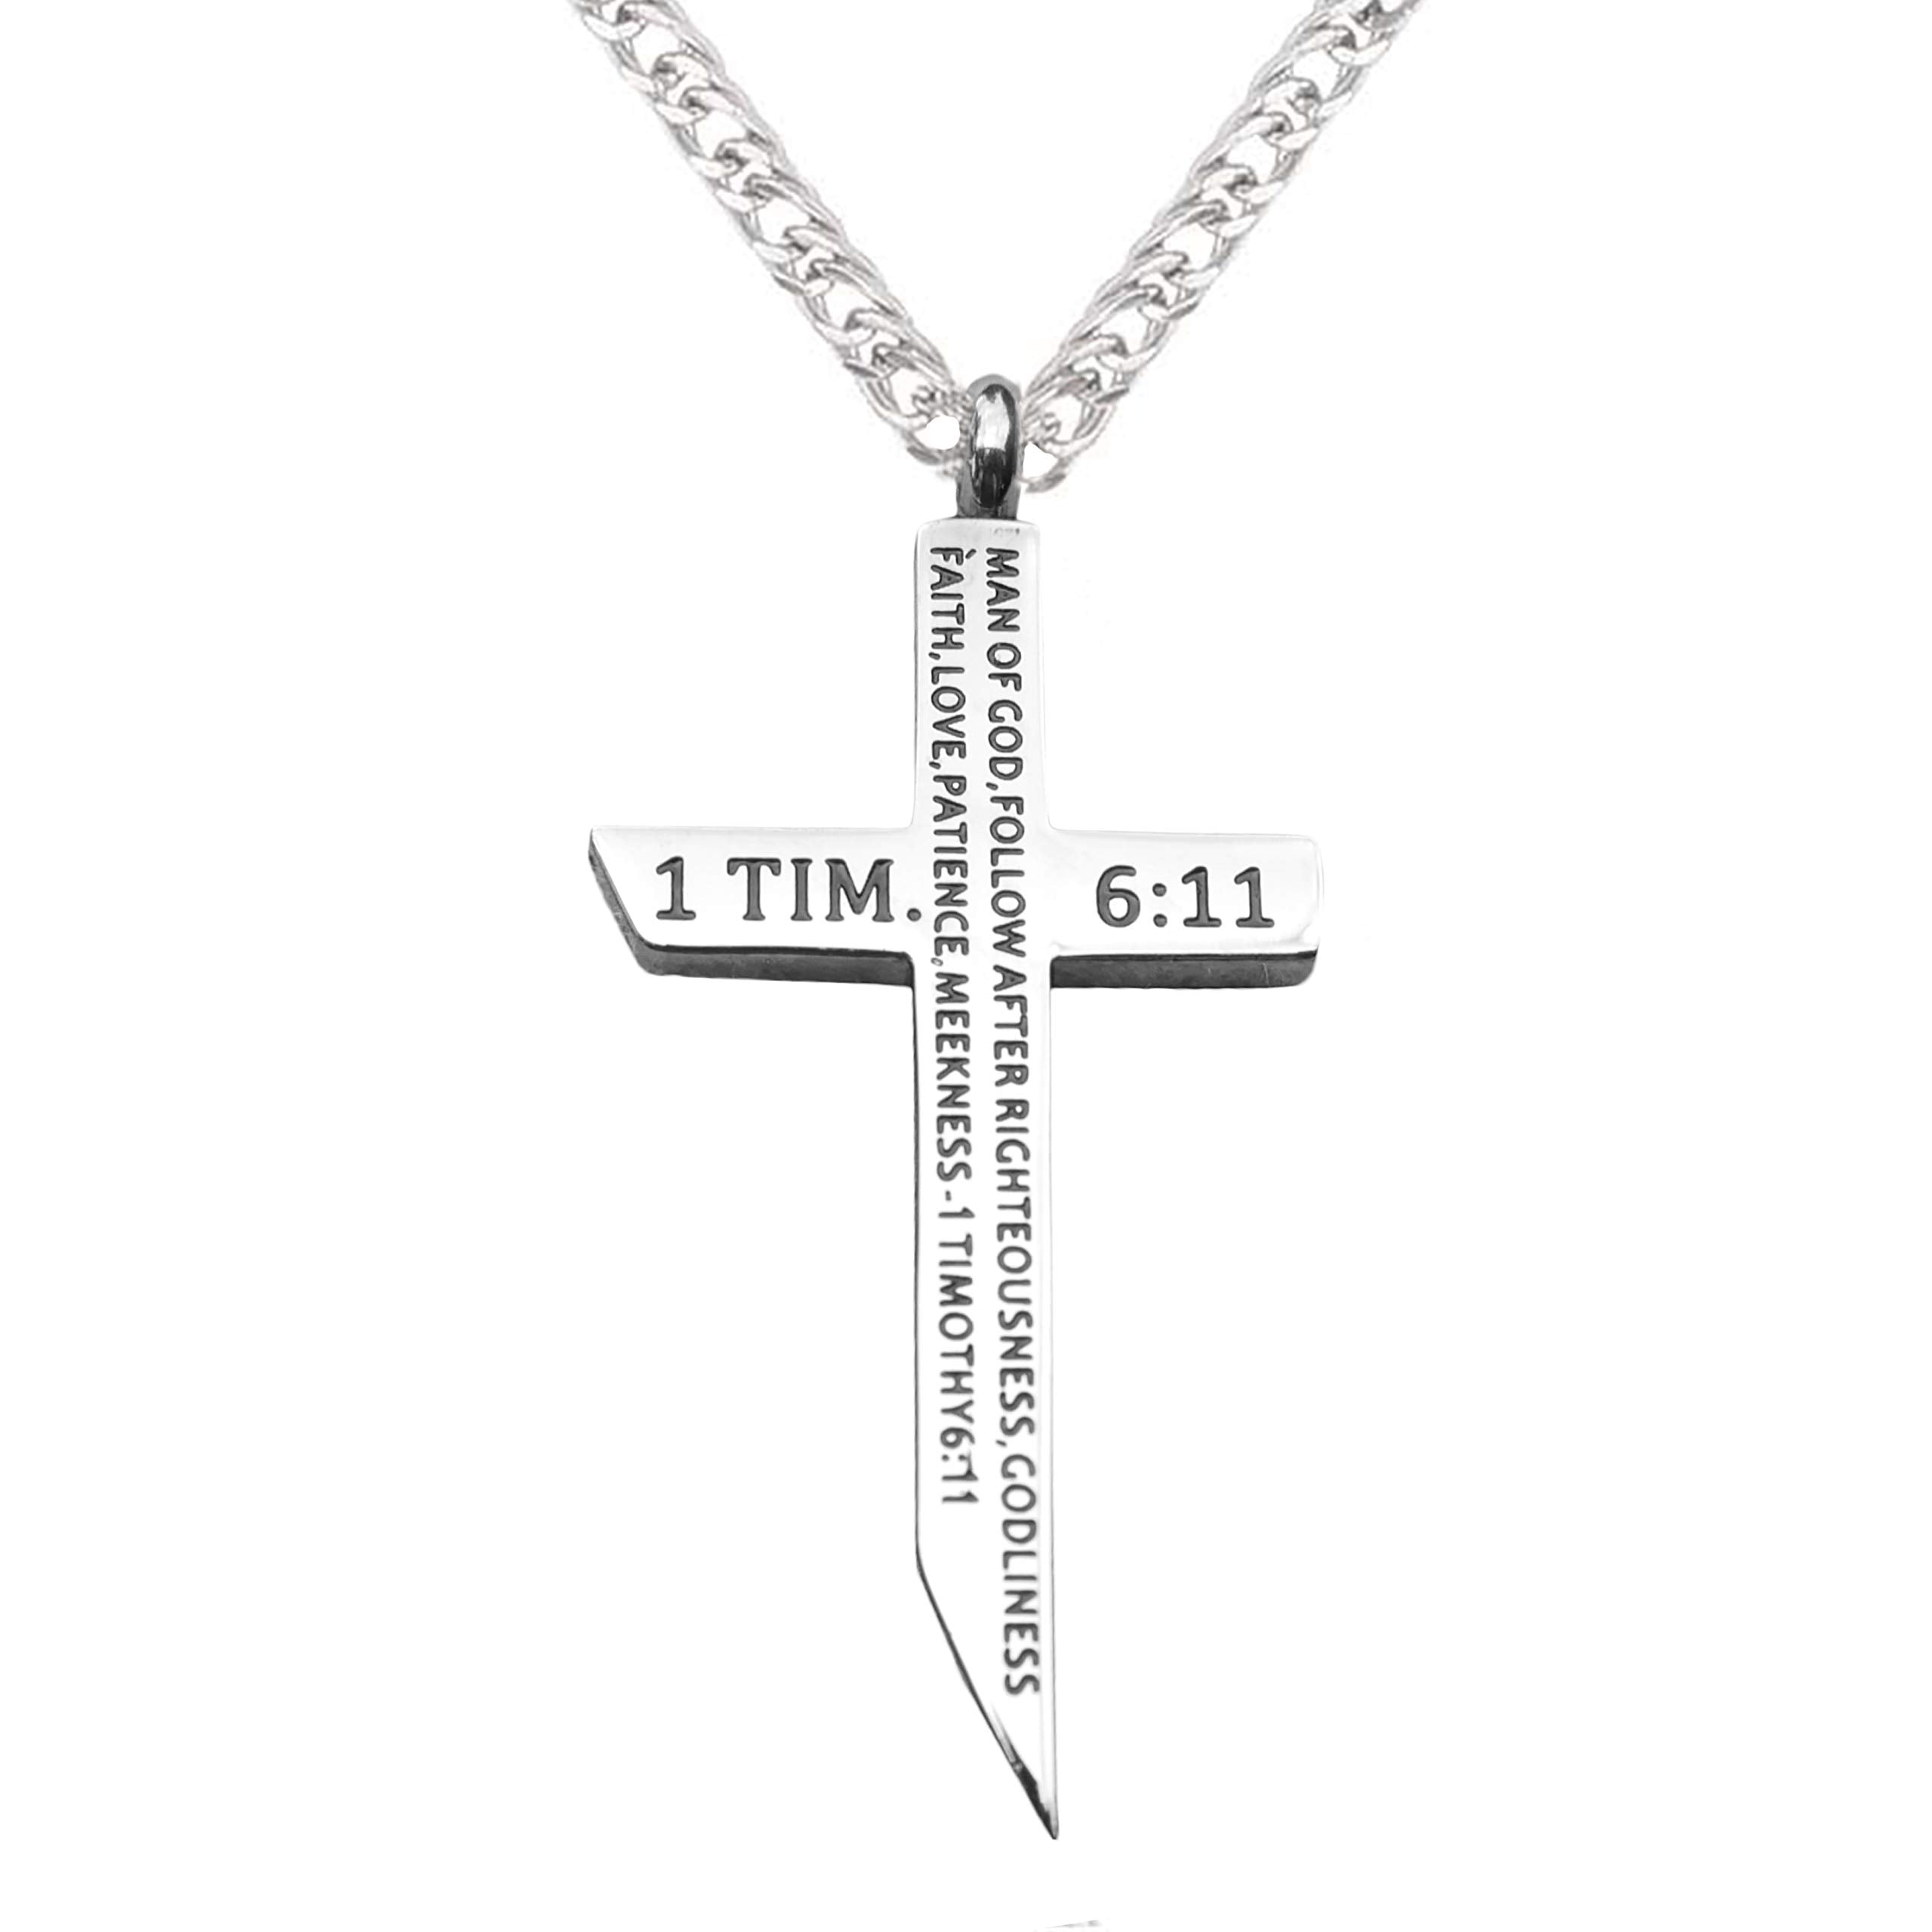 epiphaneia Men's Stainless Steel Cross Necklace"Man Of God" 1 Timothy 6:11. Mens Jewelry Cross Necklaces Christian Religious Gifts Christians for Men - Birthday gift for Dad, Father's Day, Christmas